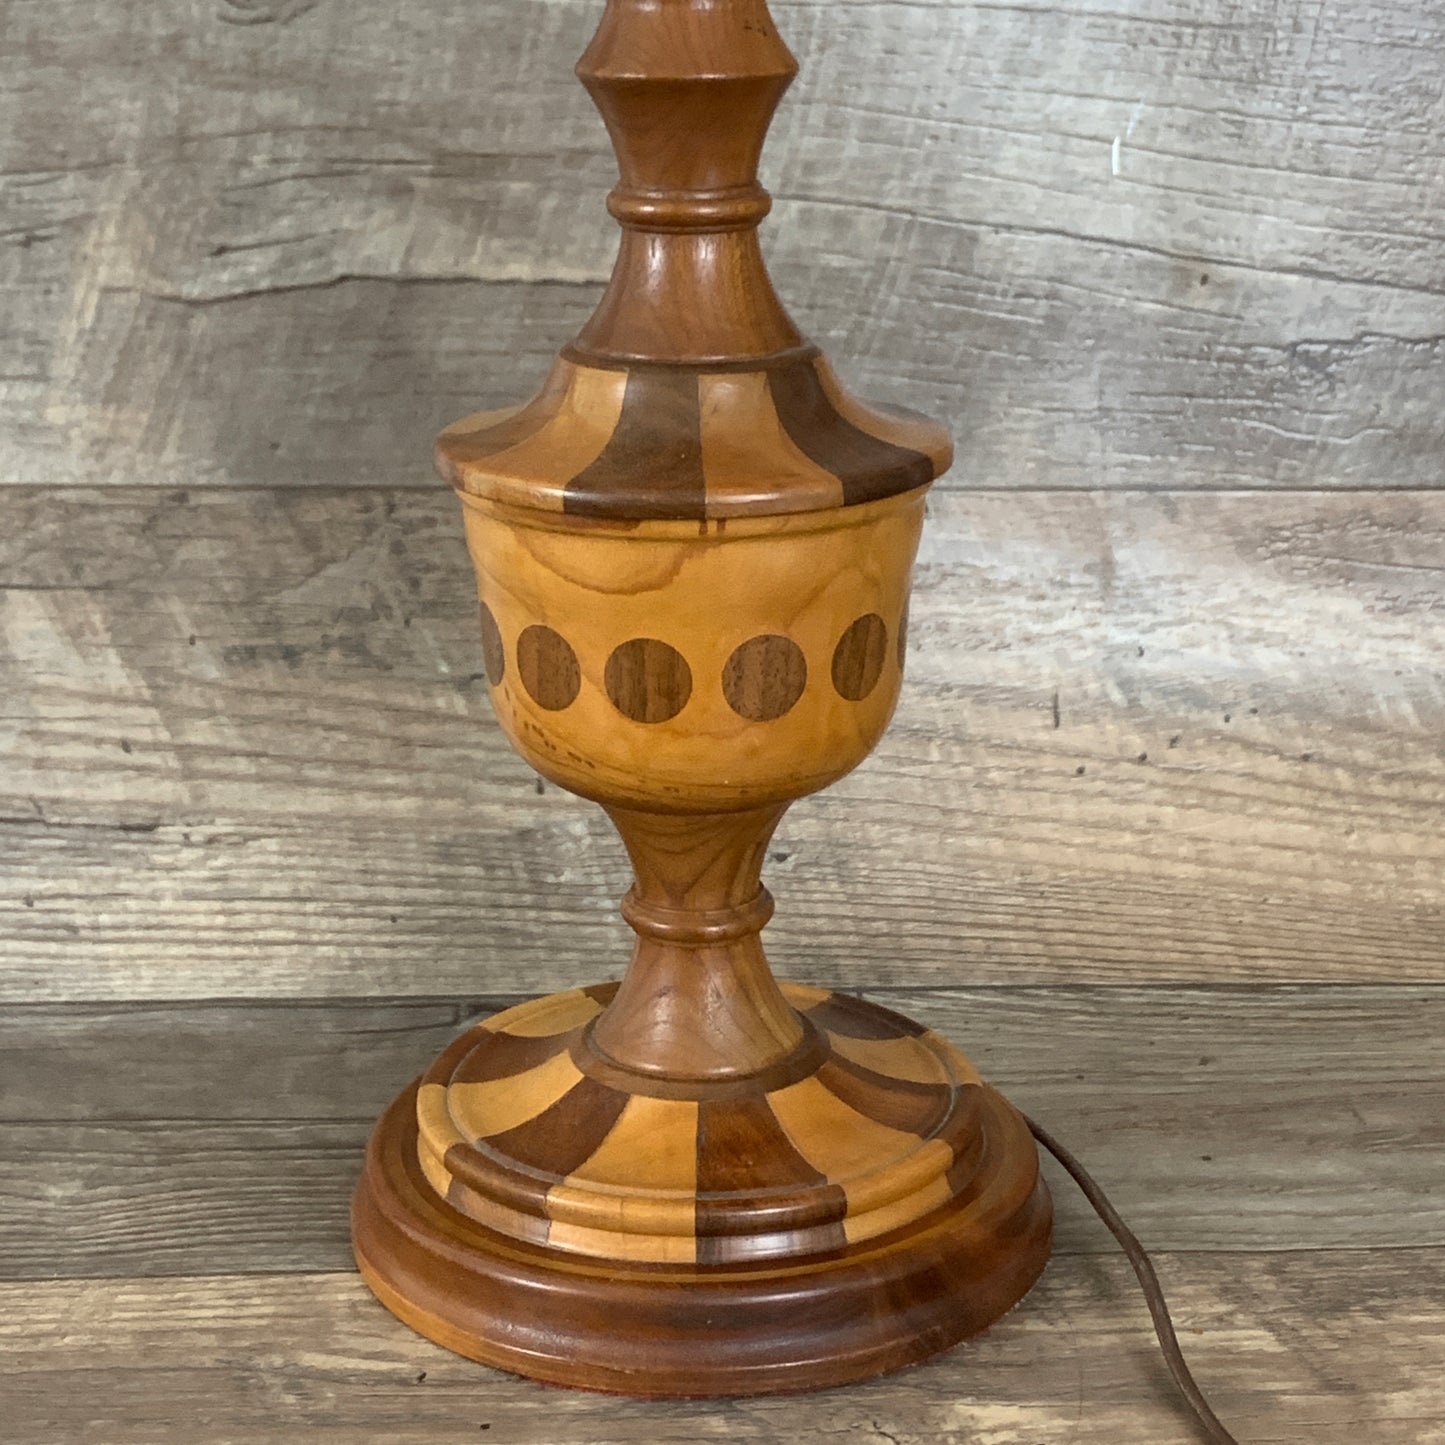 Wooden Table Lamp with Decorative Inlay, Vintage Wooden Lamp